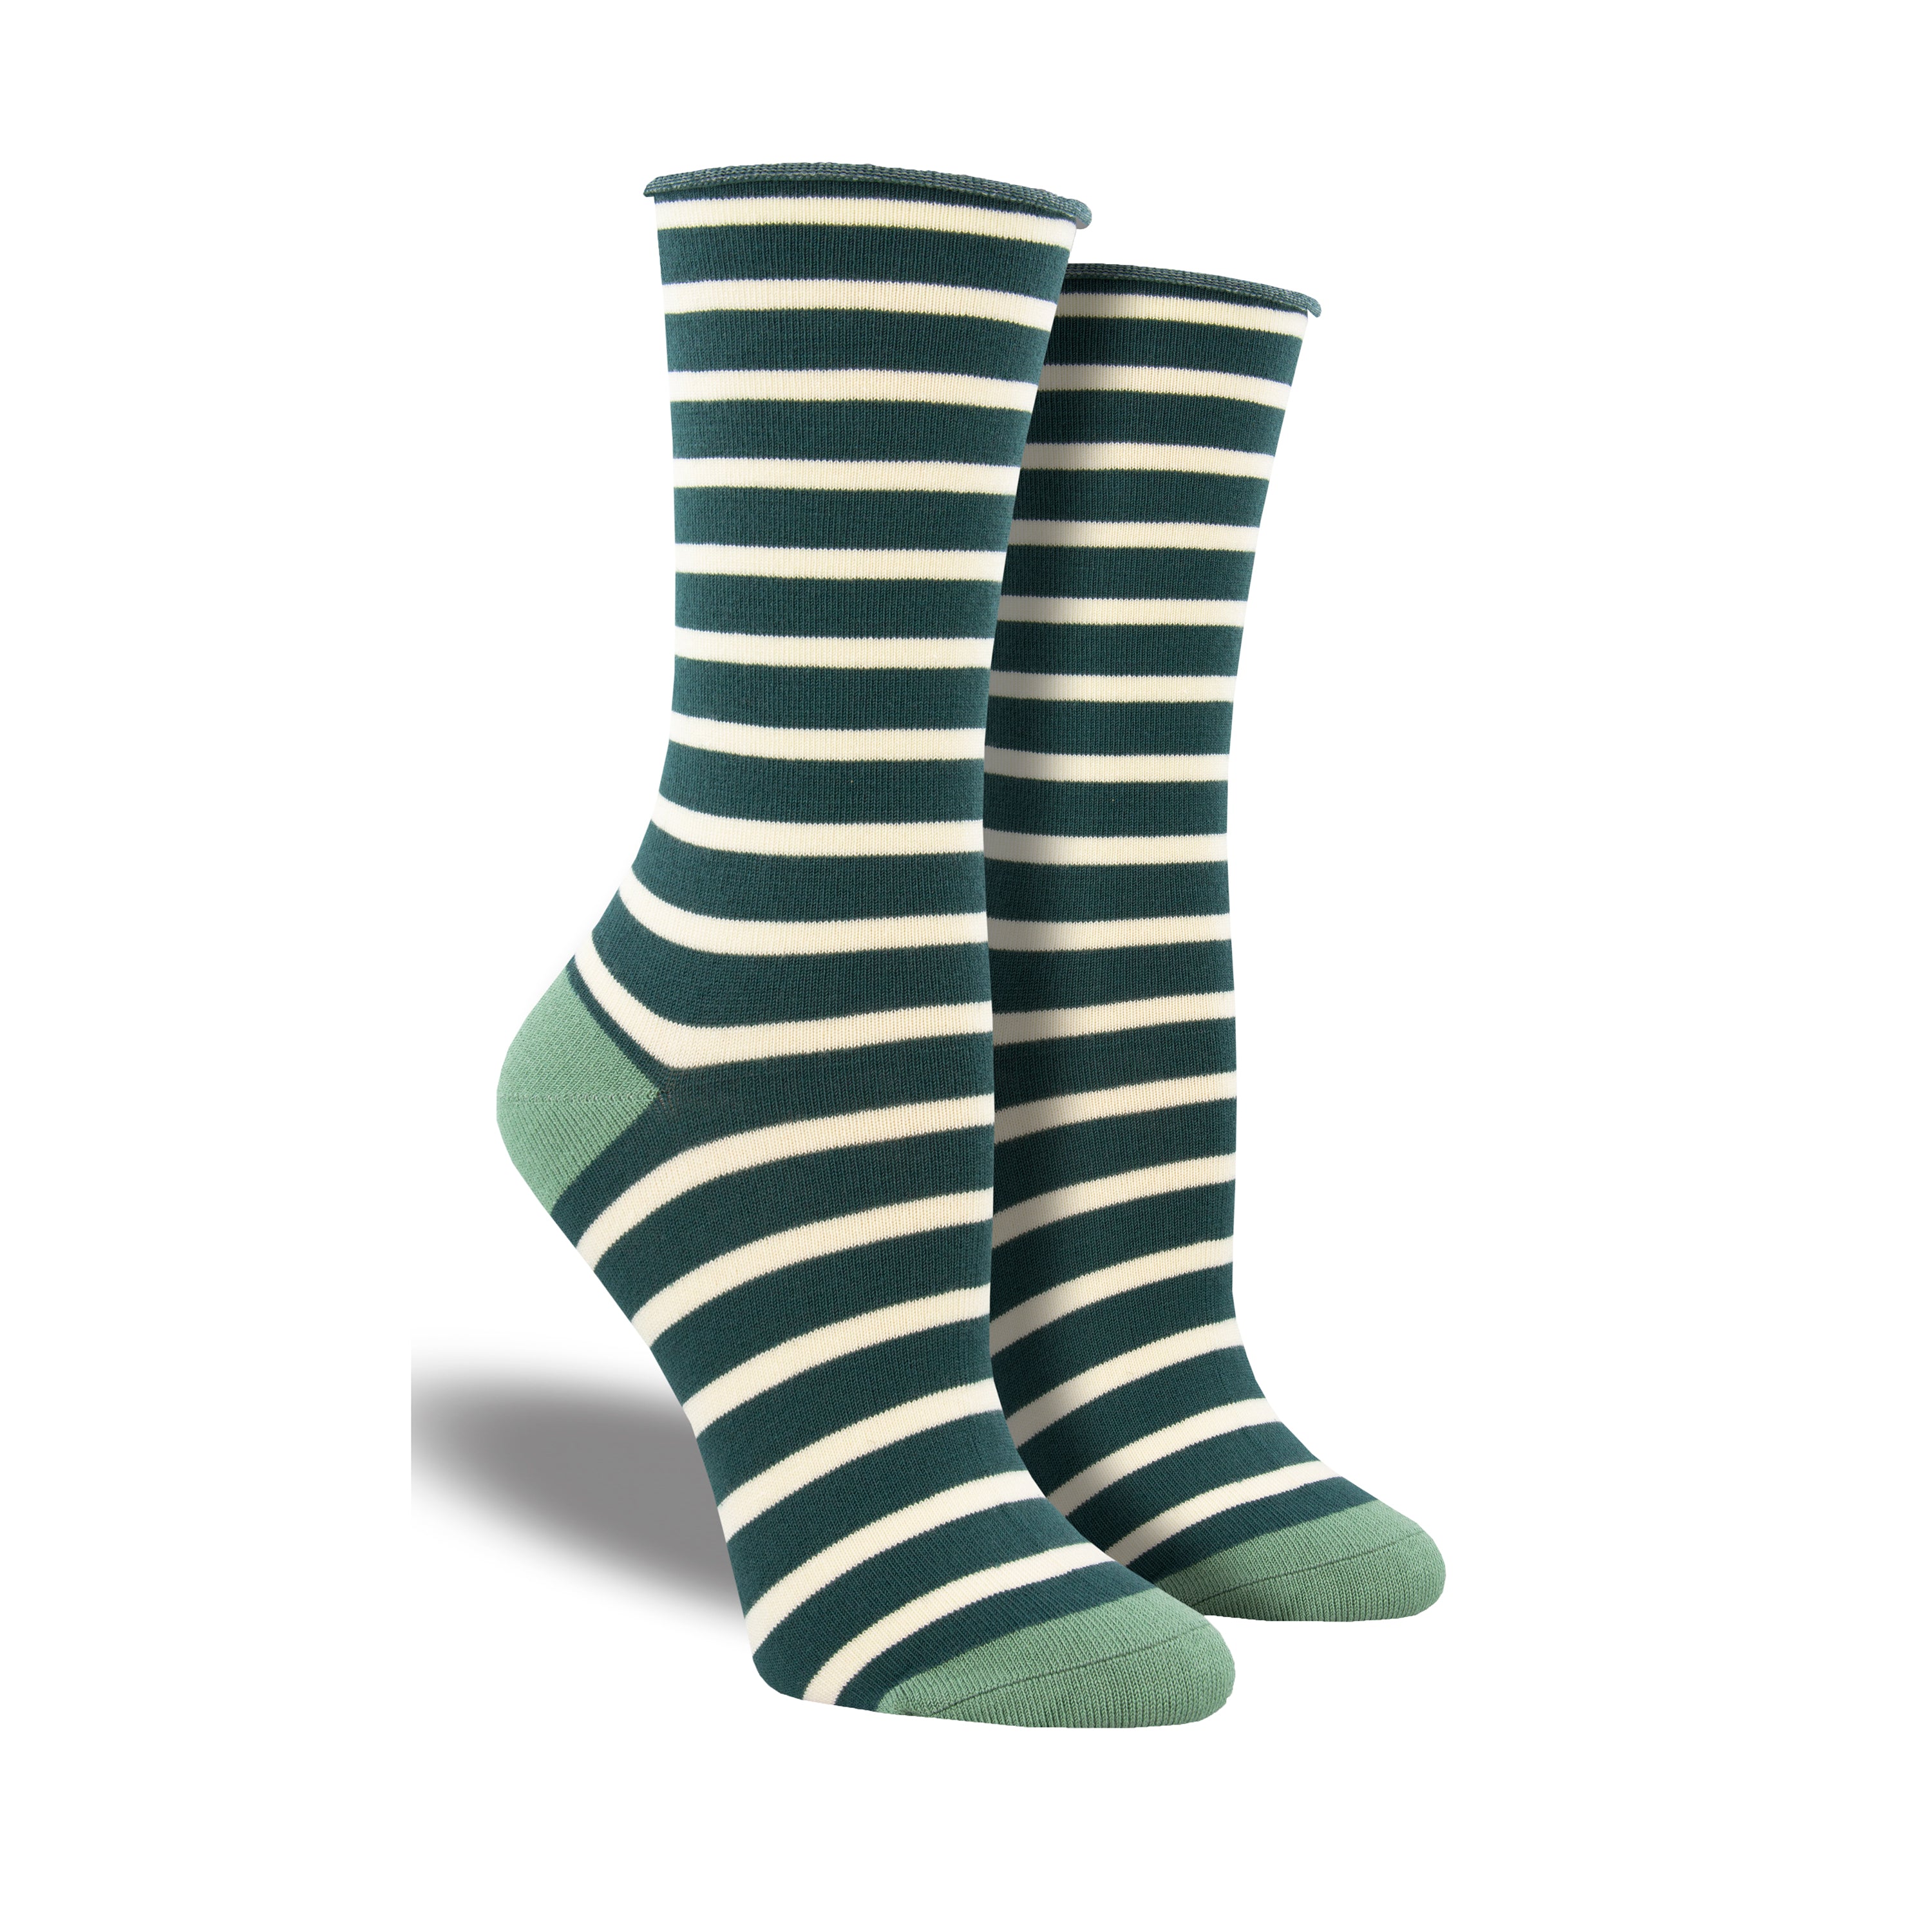 Shown on leg forms, a pair of Socksmith brand women's bamboo crew roll-top socks in green and white stripes with a light green heel and toe.